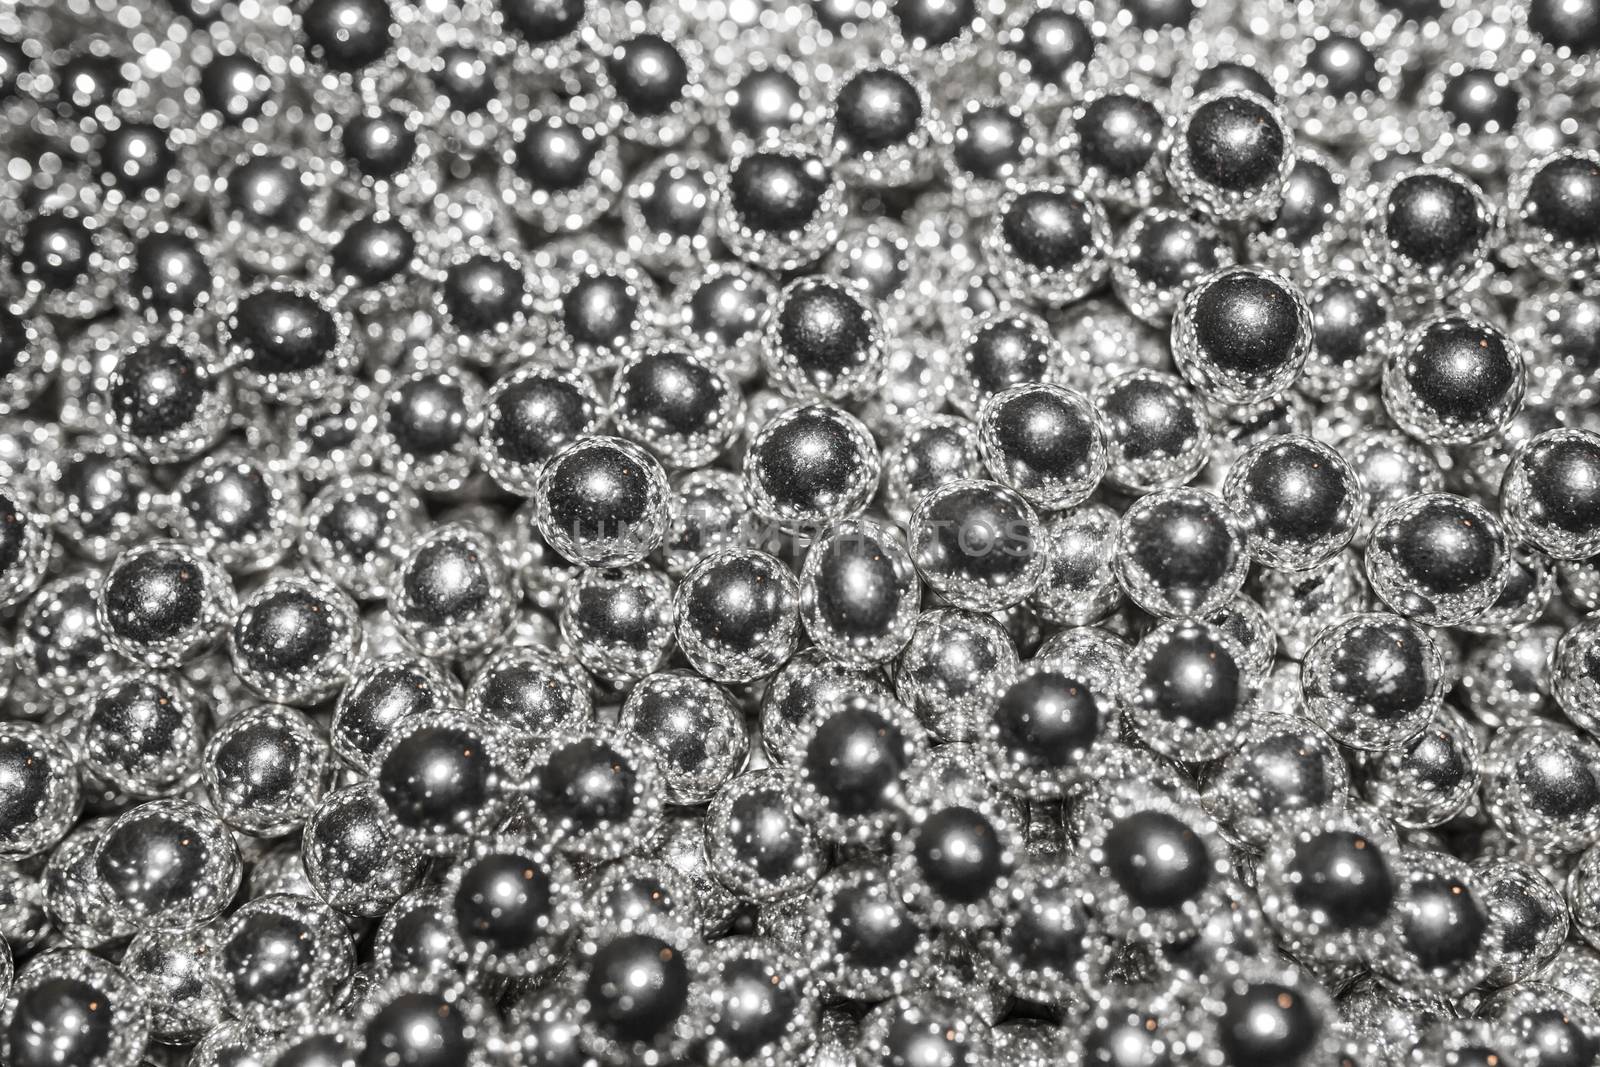 Sprinkles silver ball, cake decorations in a form of pearls.